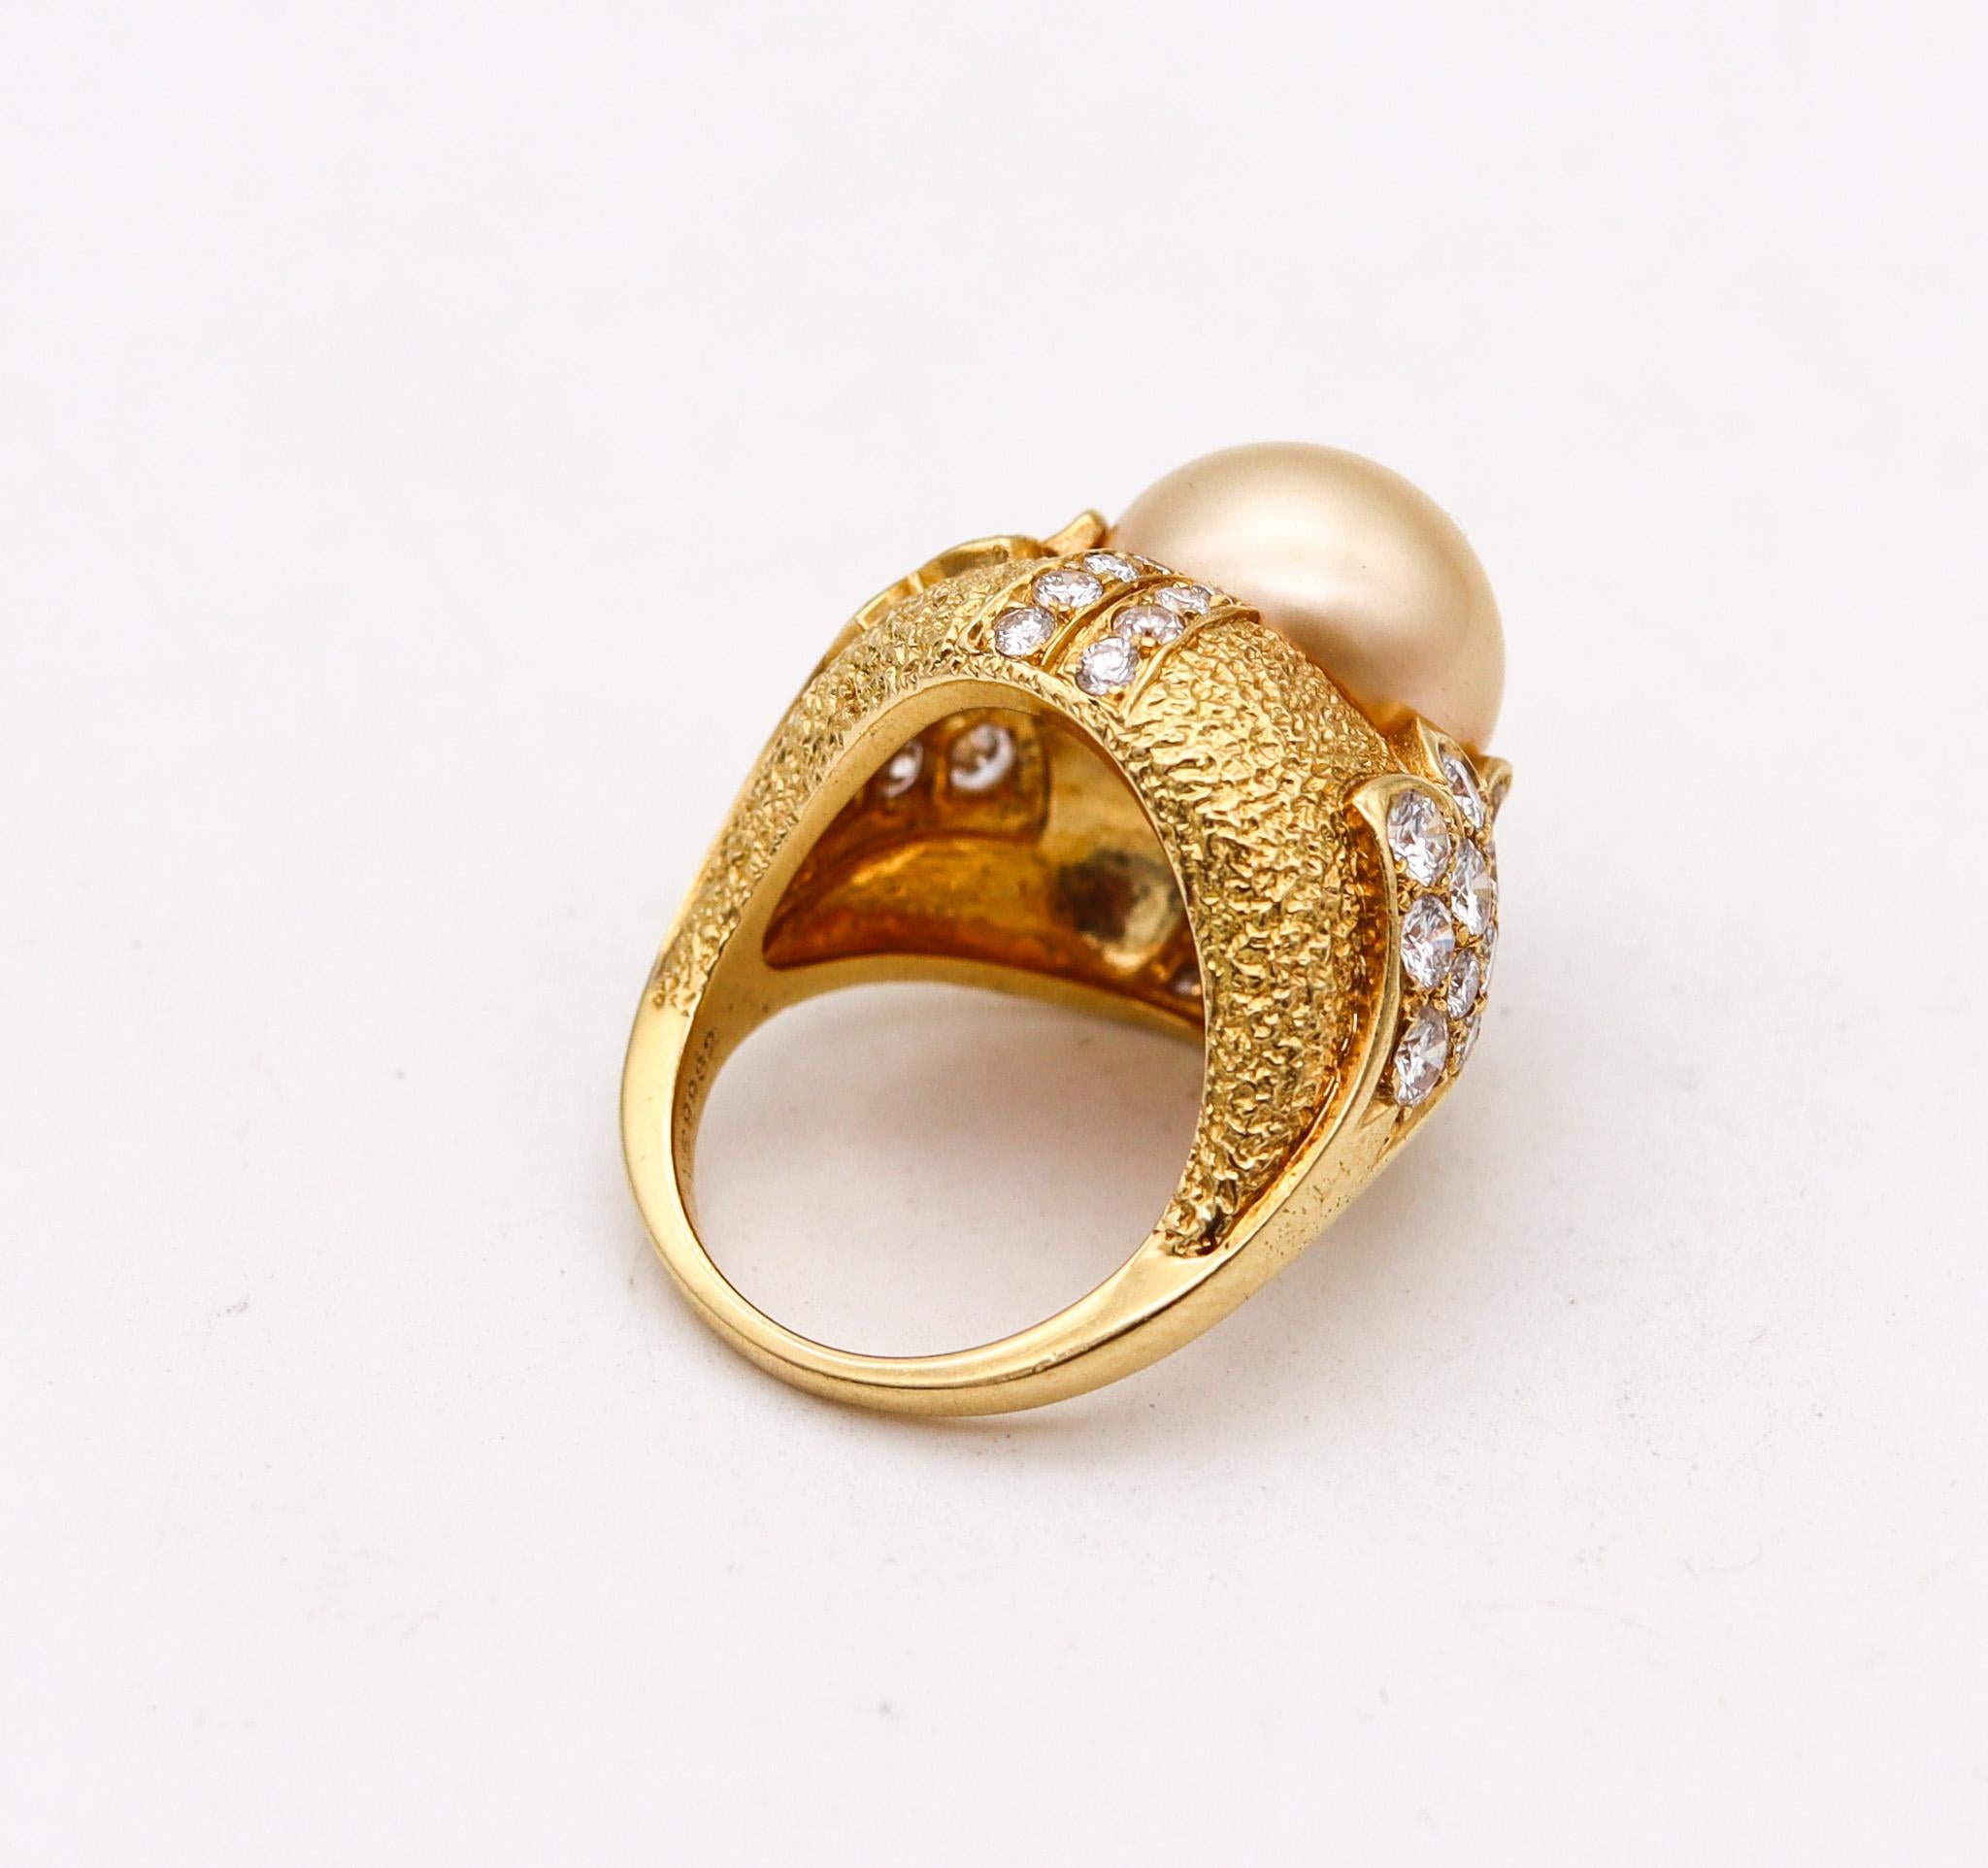 Round Cut Van Cleef & Arpels Golden Pearl Cocktail Ring 18Kt Gold With 3.46 Ctw Diamonds For Sale